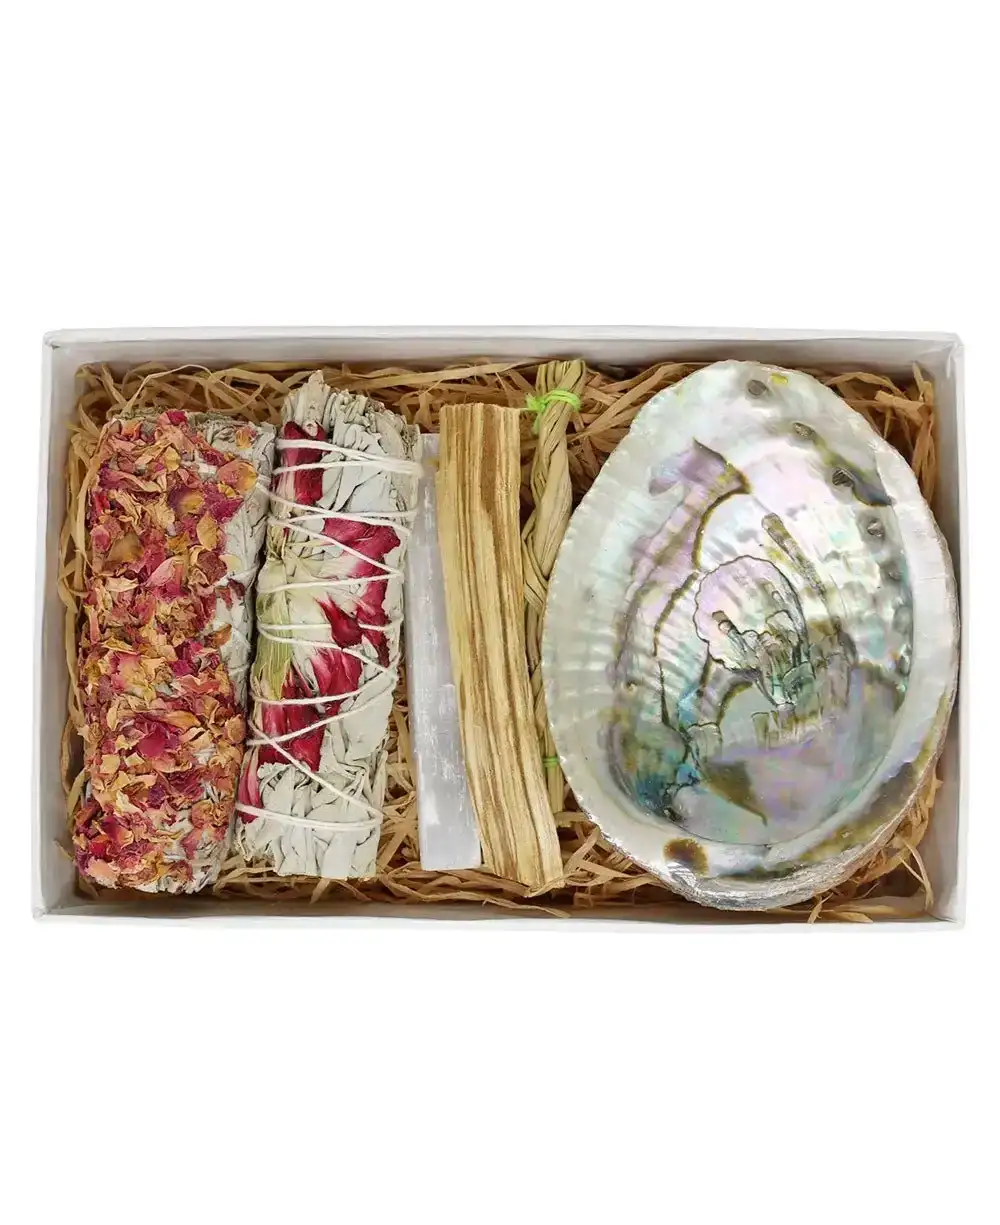 Image of Floral Sage Smudge Kit in White Gift Box